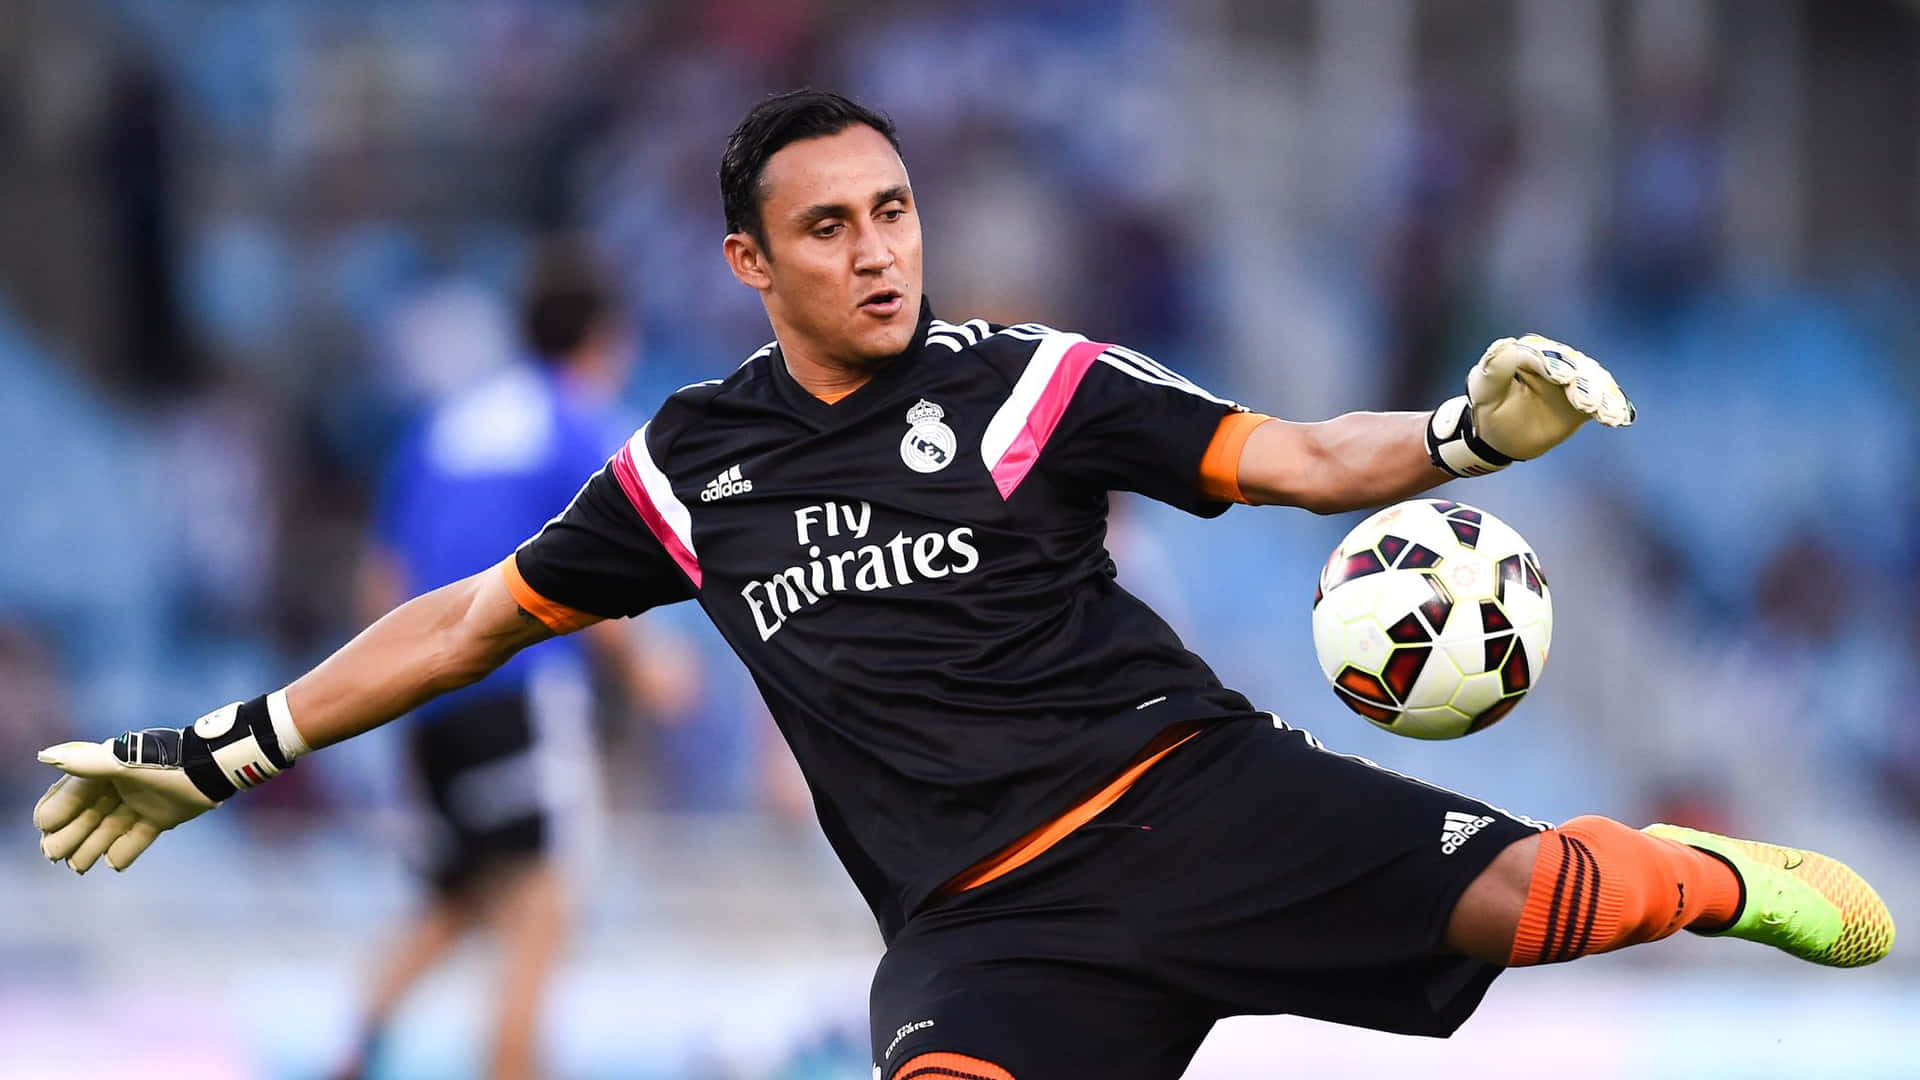 Keylor Navas in action during a soccer match Wallpaper